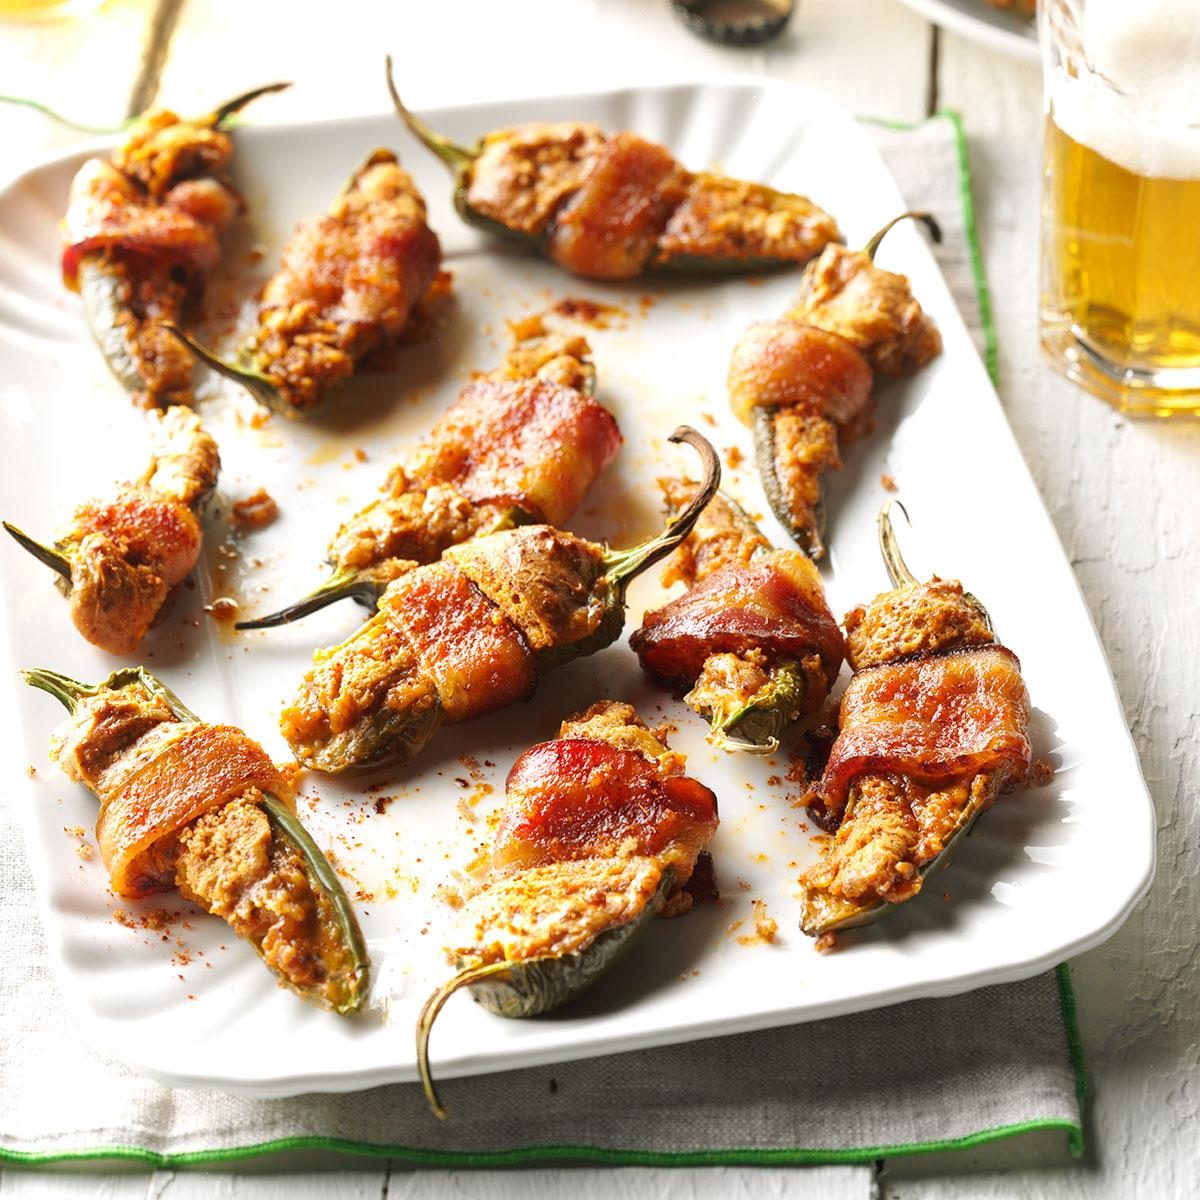 South Your Mouth: Bacon Pineapple Jalapeno Poppers